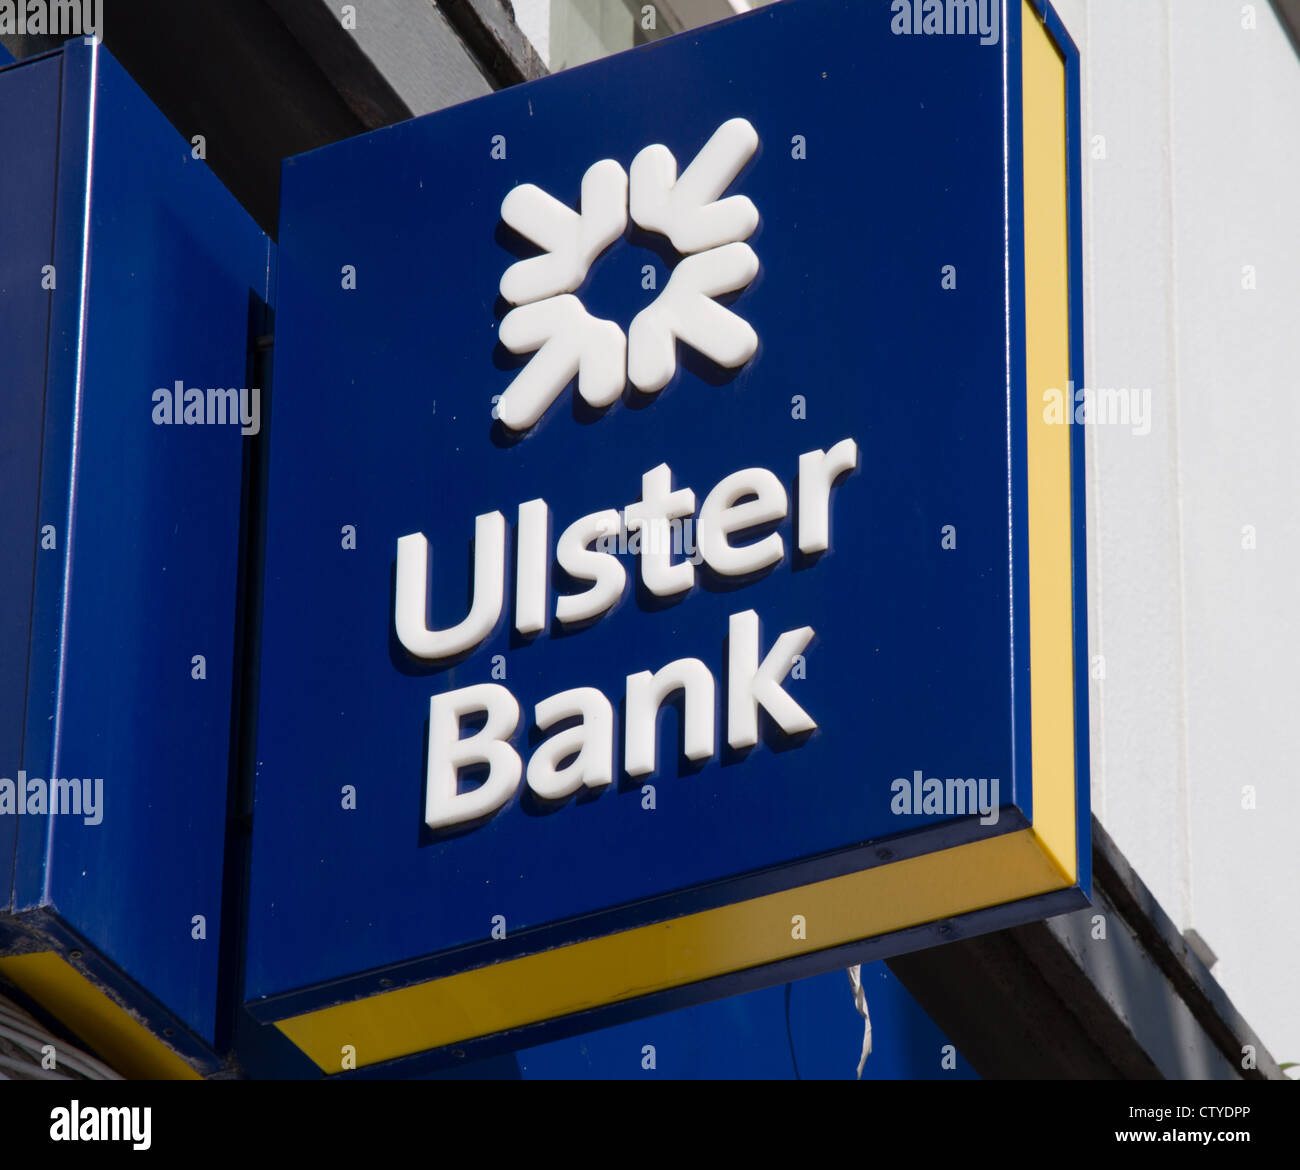 Ulster Bank sign Stock Photo